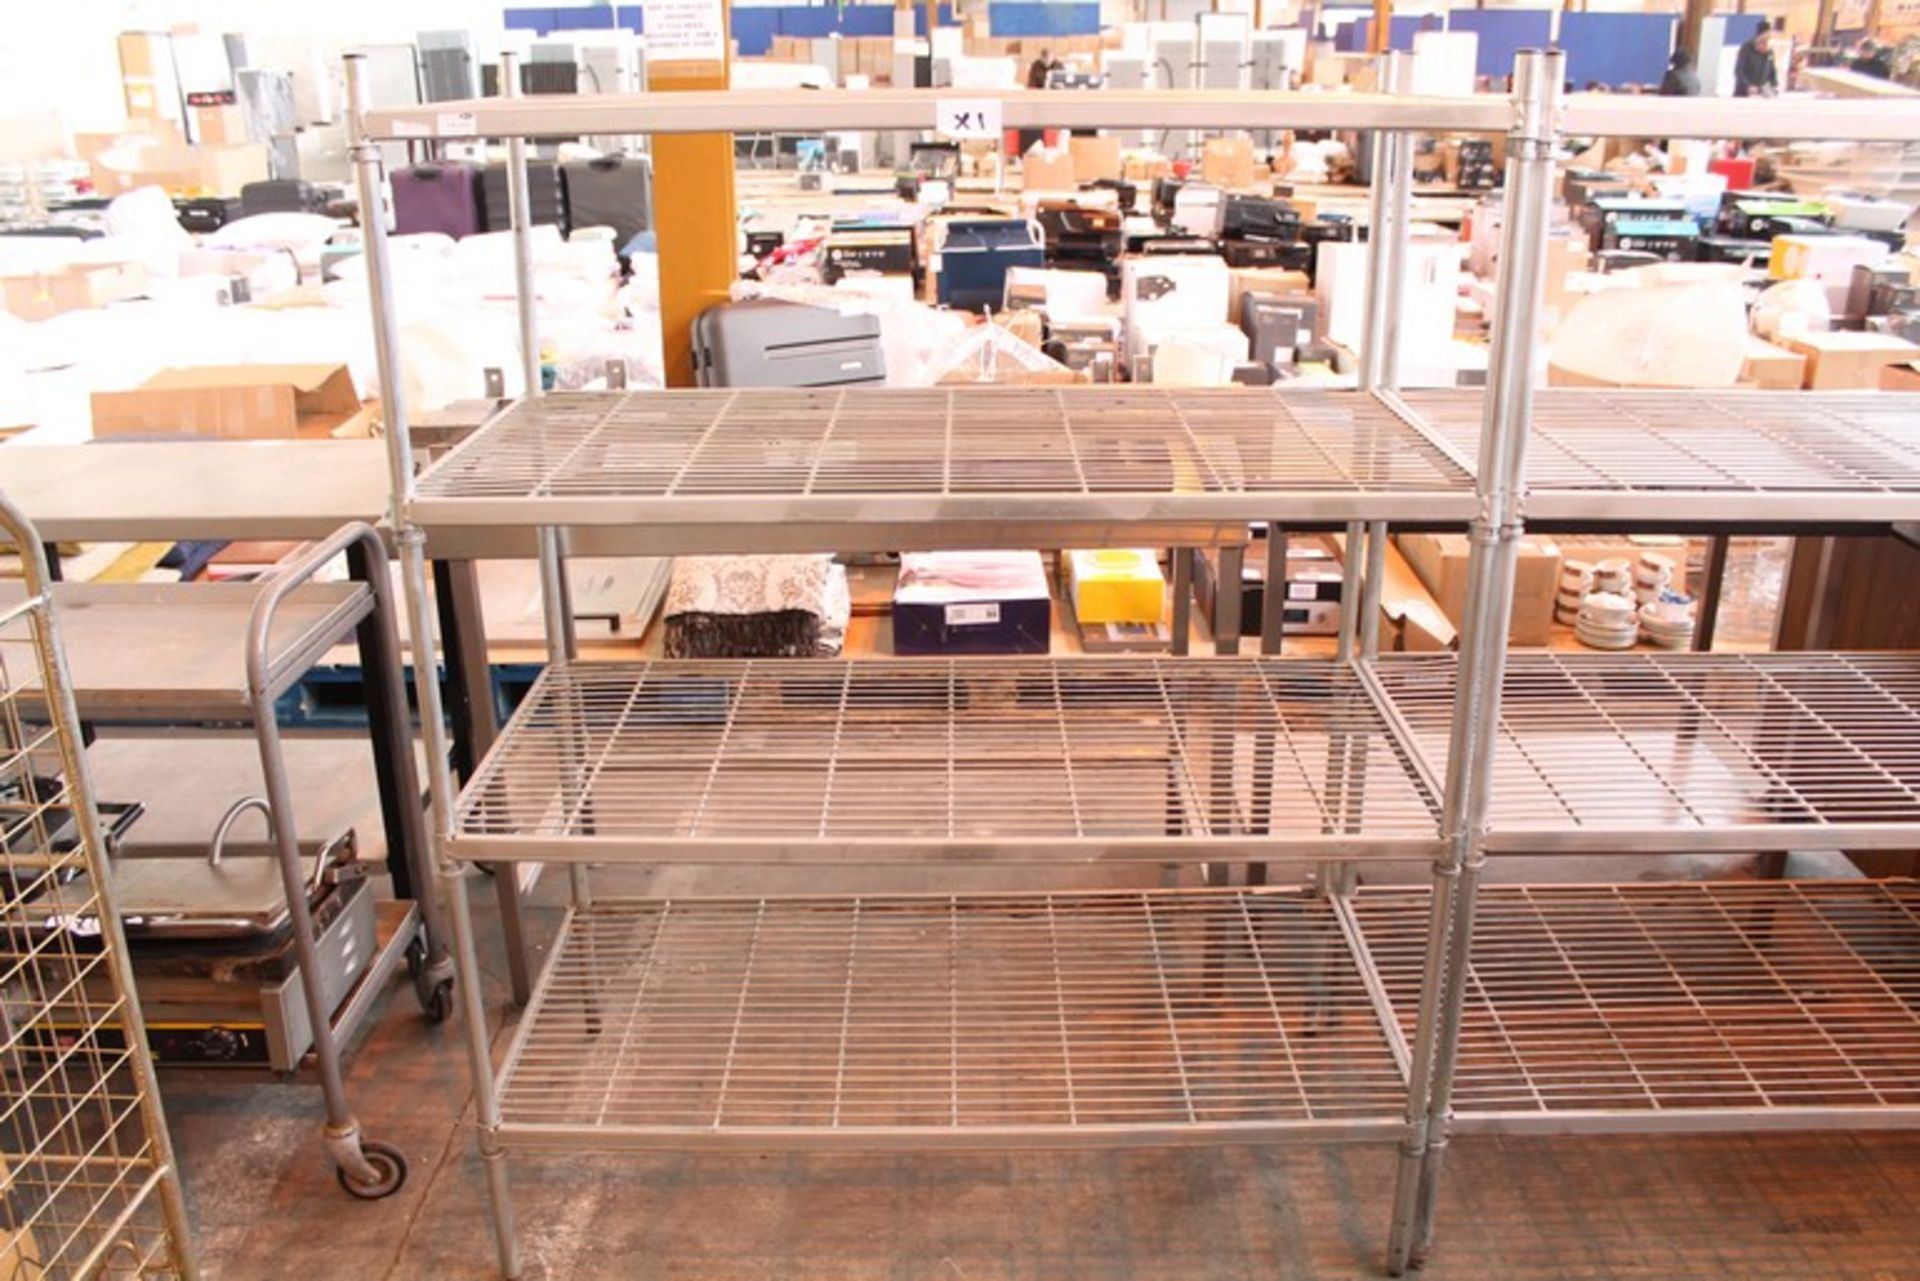 ONE 4 TIER STAINLESS STEEL KITCHEN SHELF (CATERING)